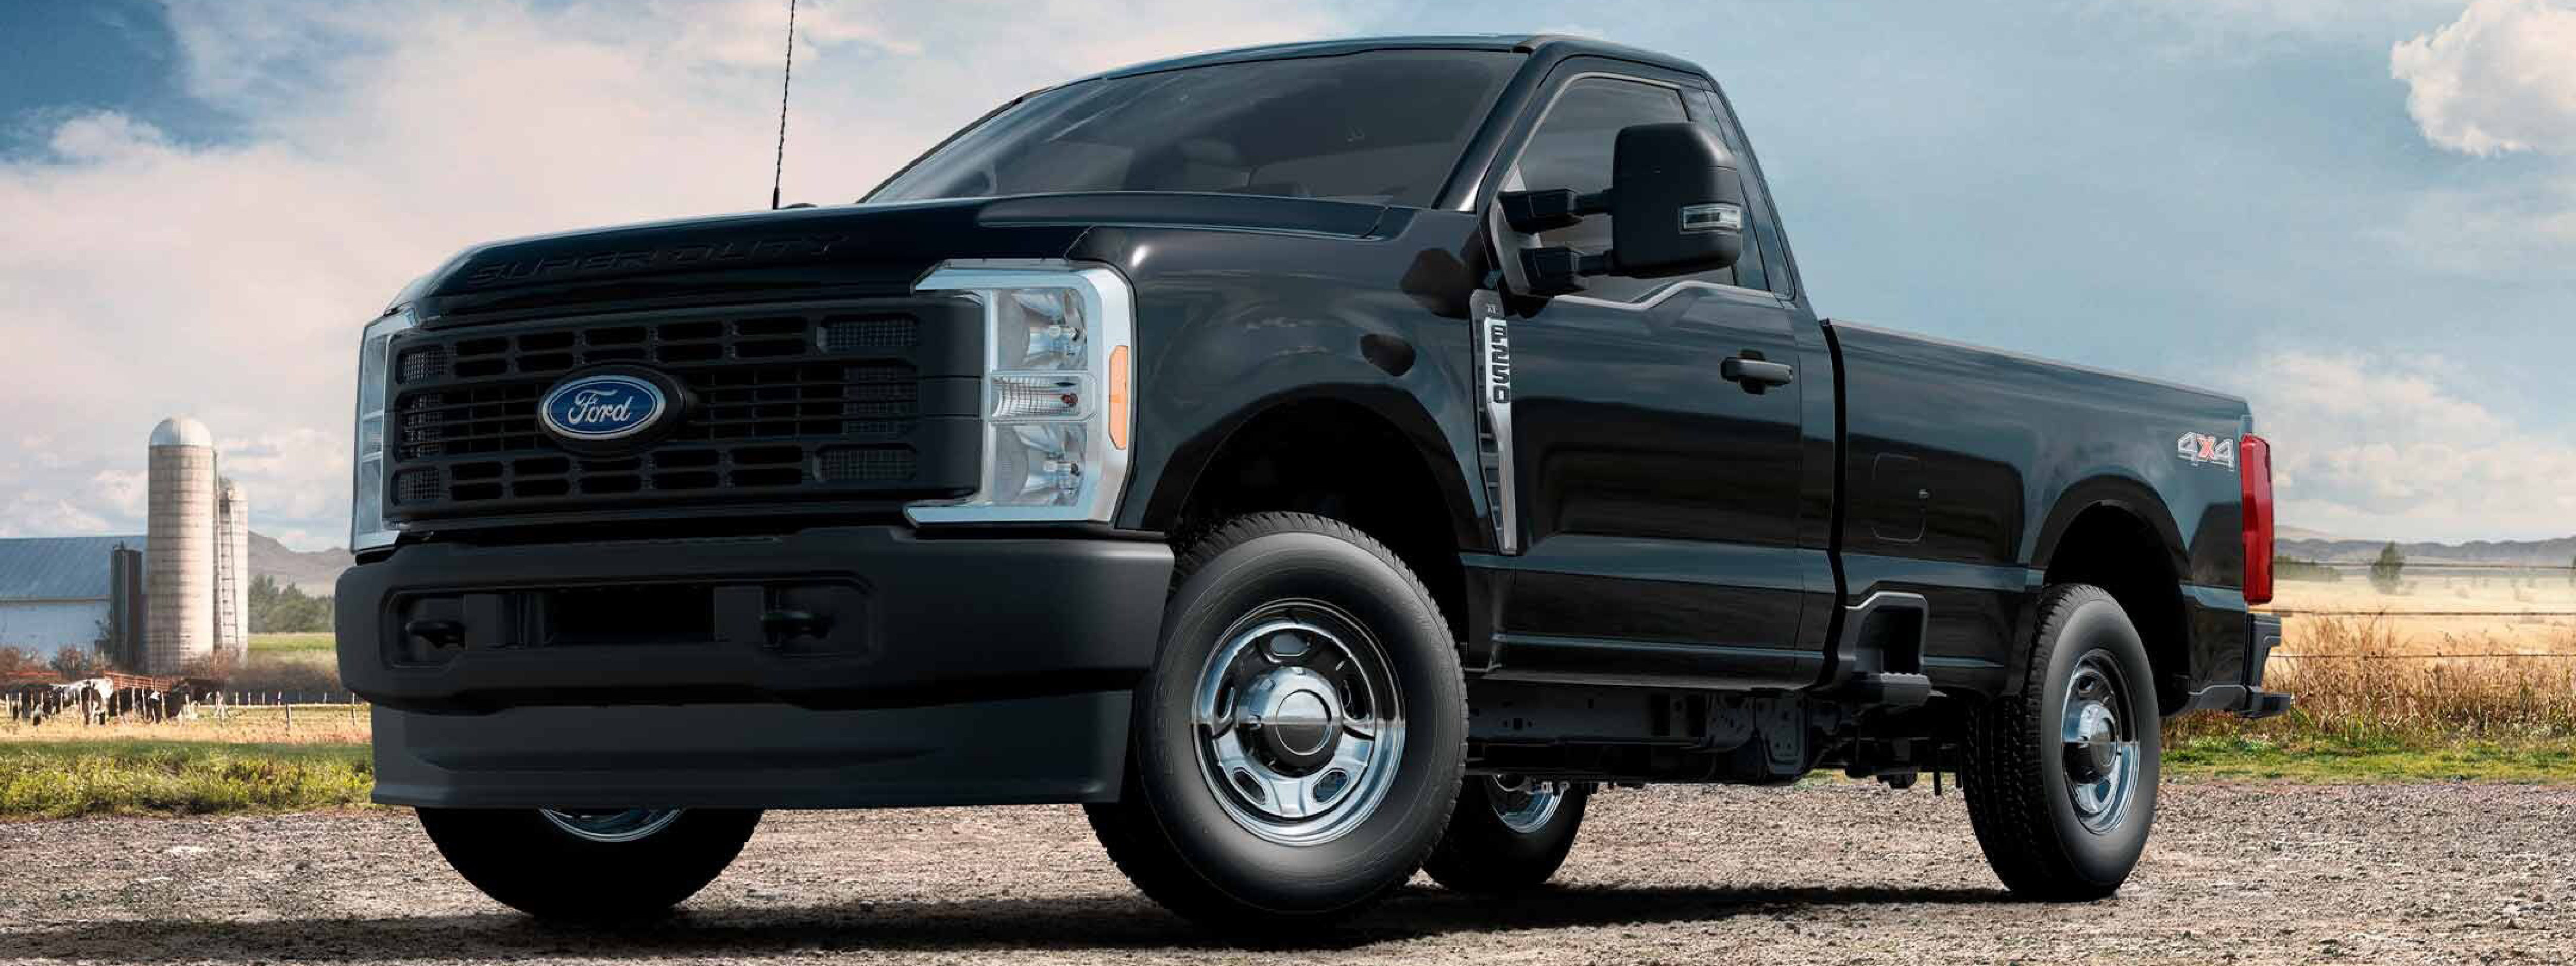 Used Ford F-250 Purchasing Guide